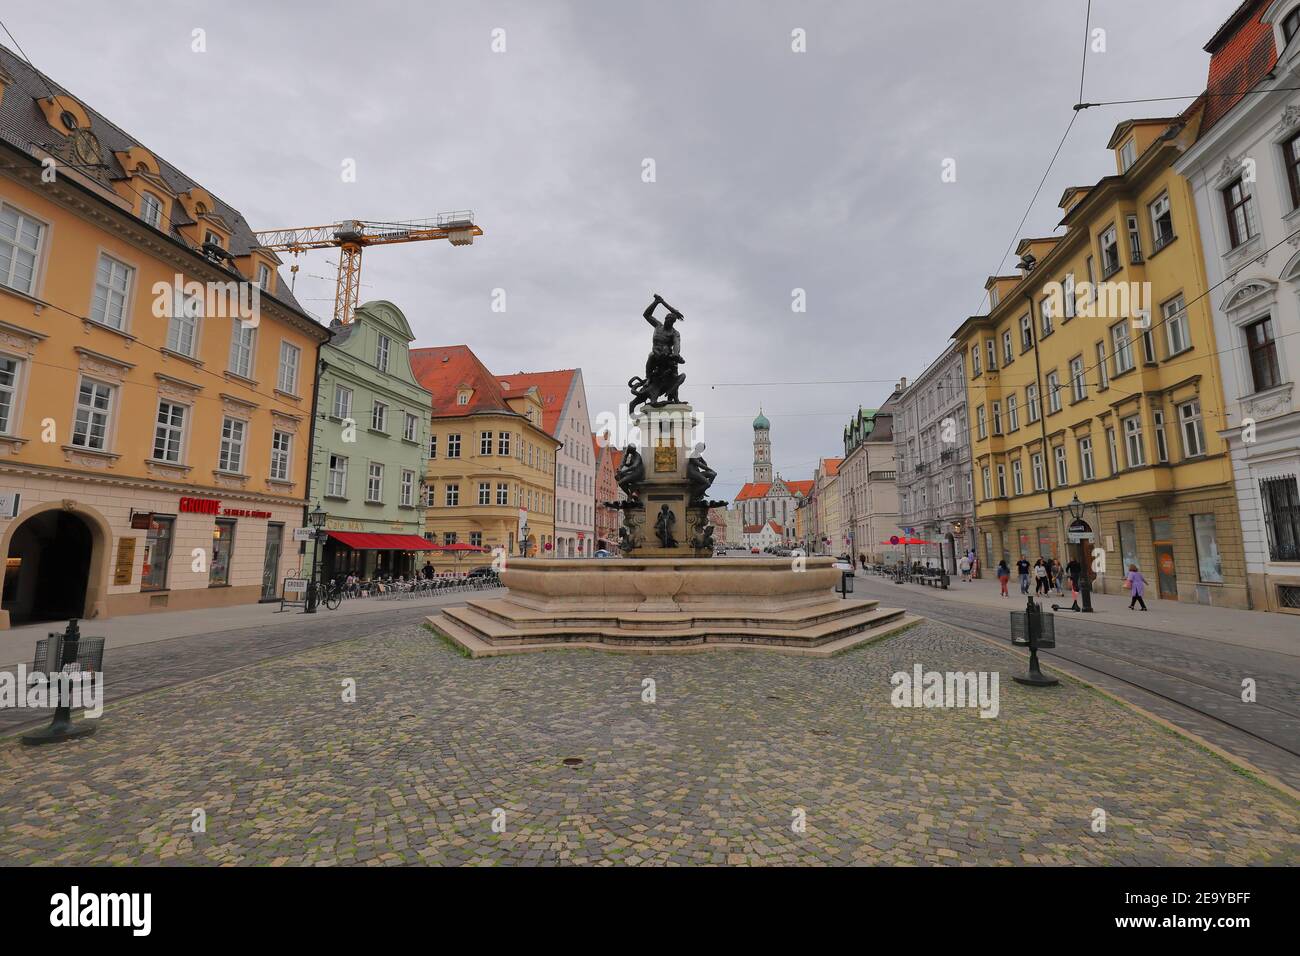 GERMANY, AUGSBURG - AUGUST 17, 2019: Hercules Fountain in the Maximilianstrasse in Augsburg Stock Photo